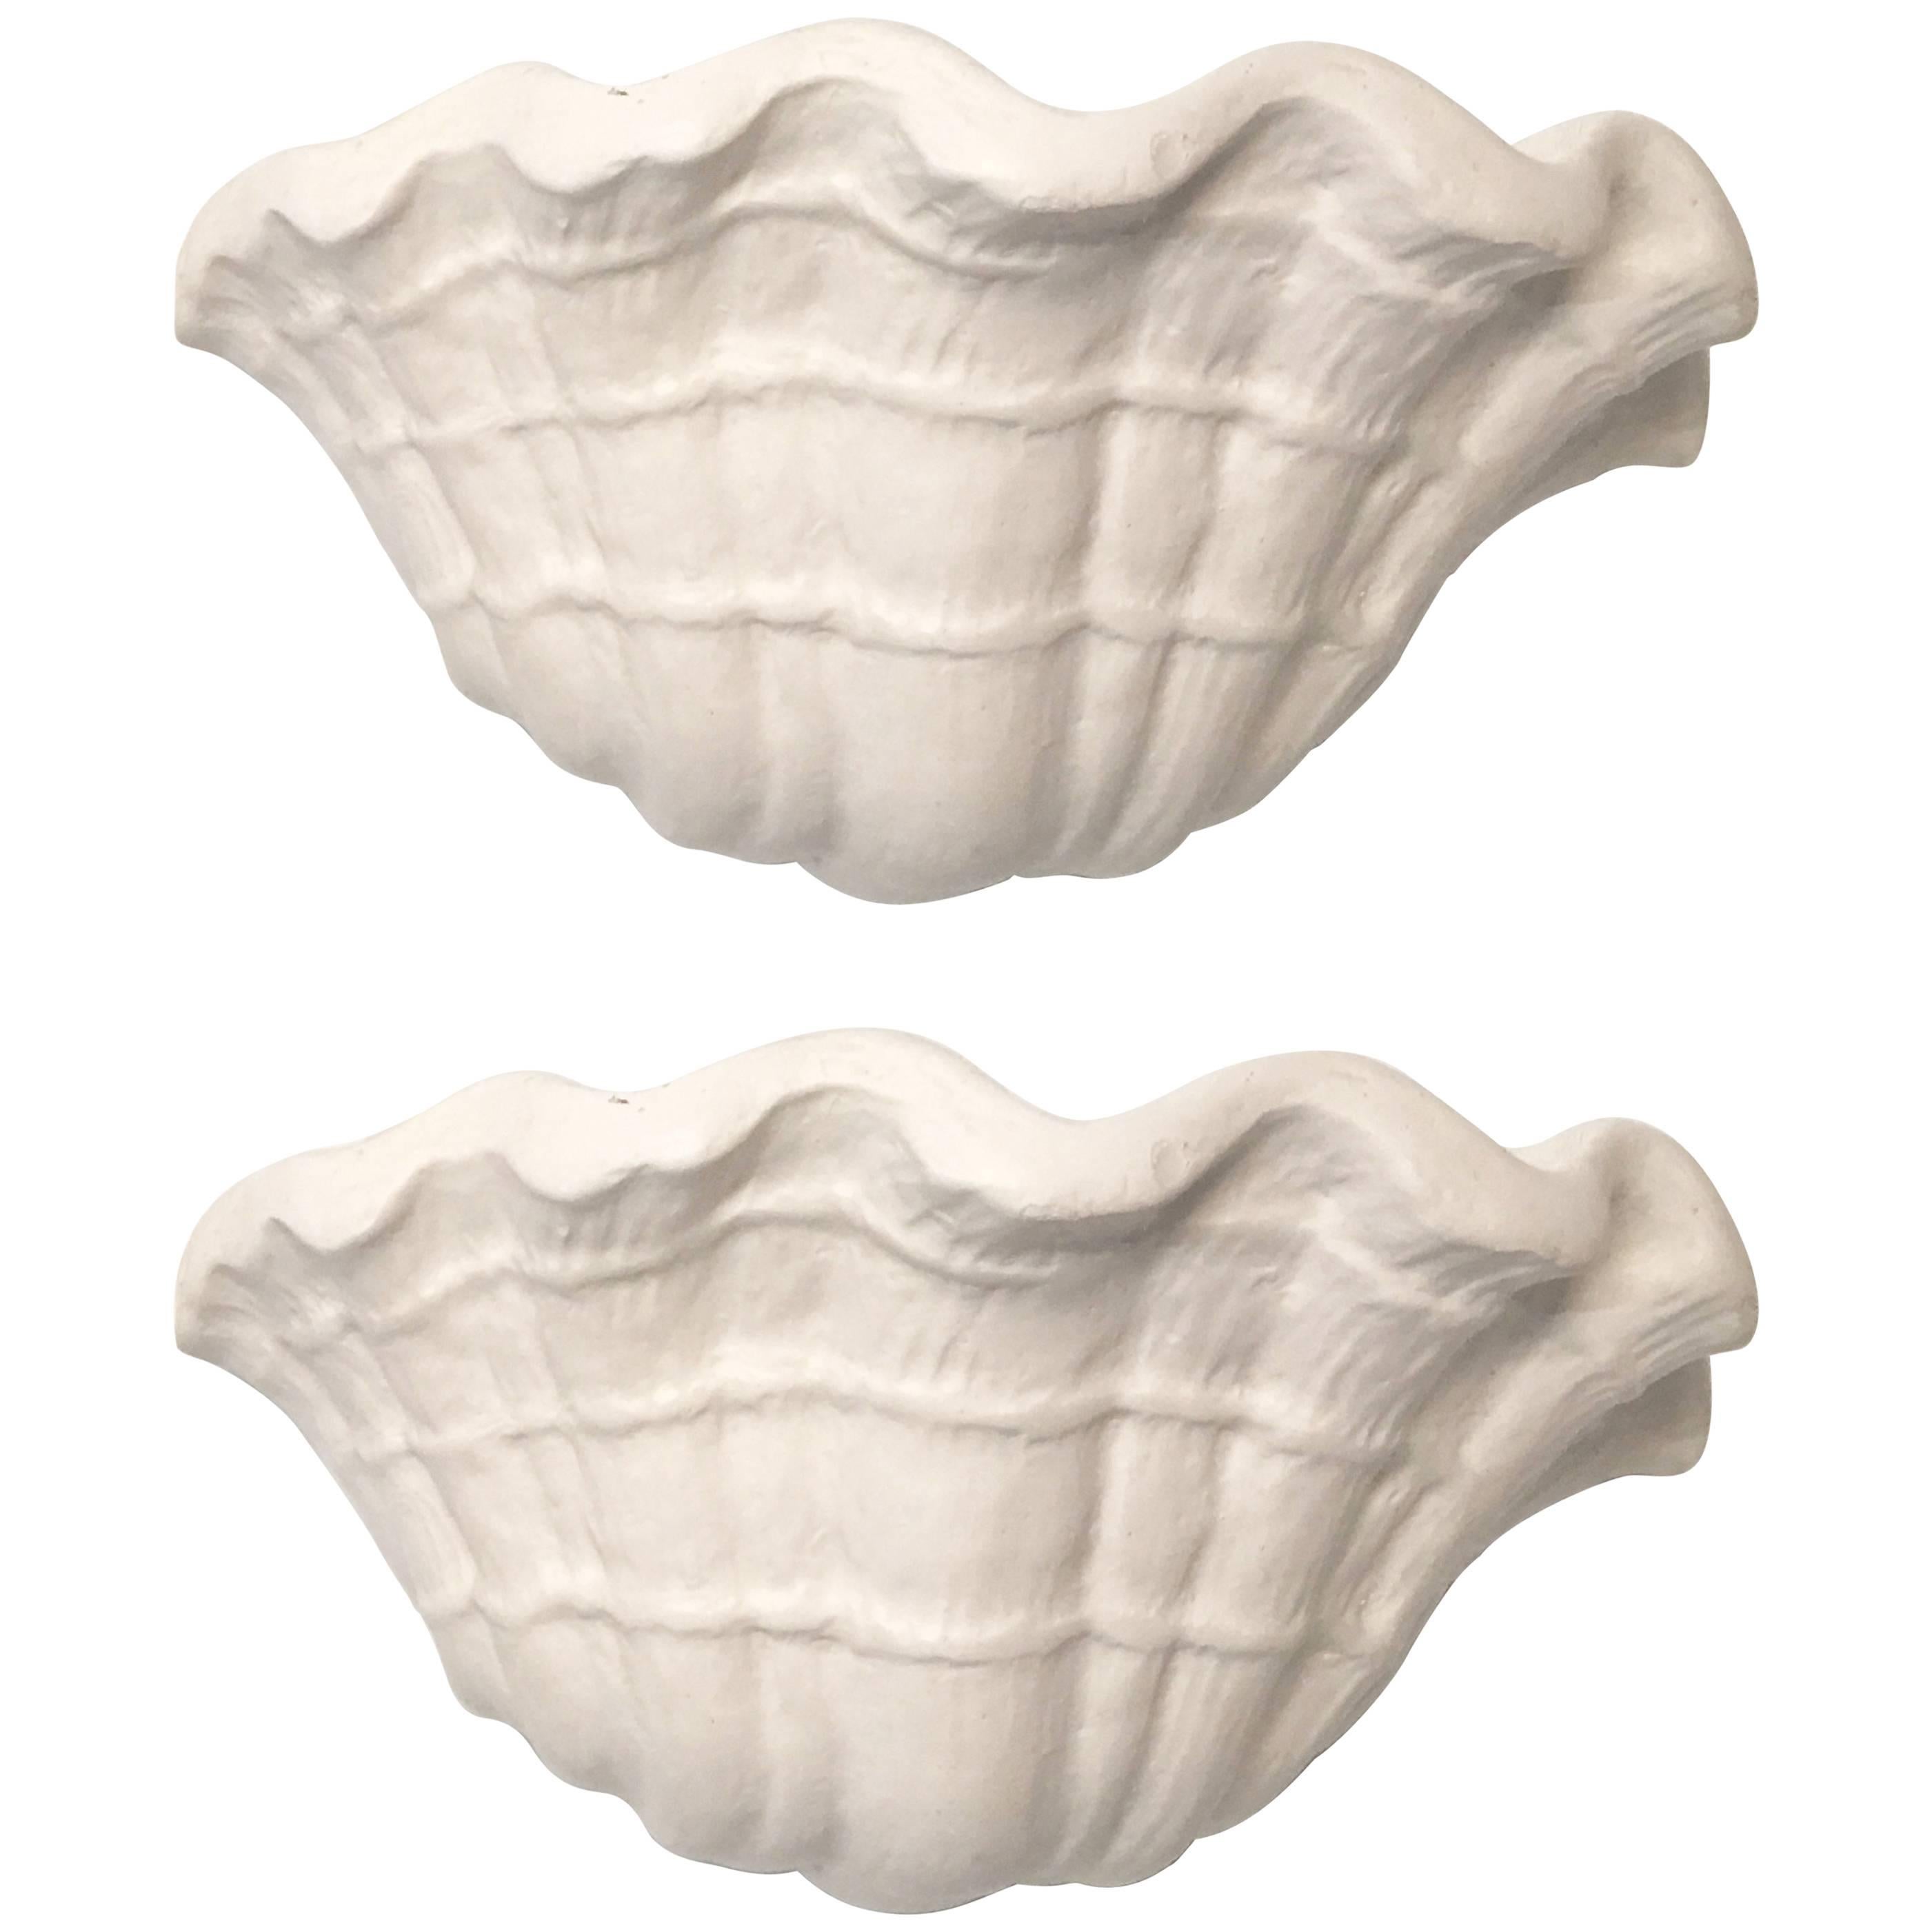 Exquisite Pair of Plaster Shell Sconces Attributed to John Dickinson